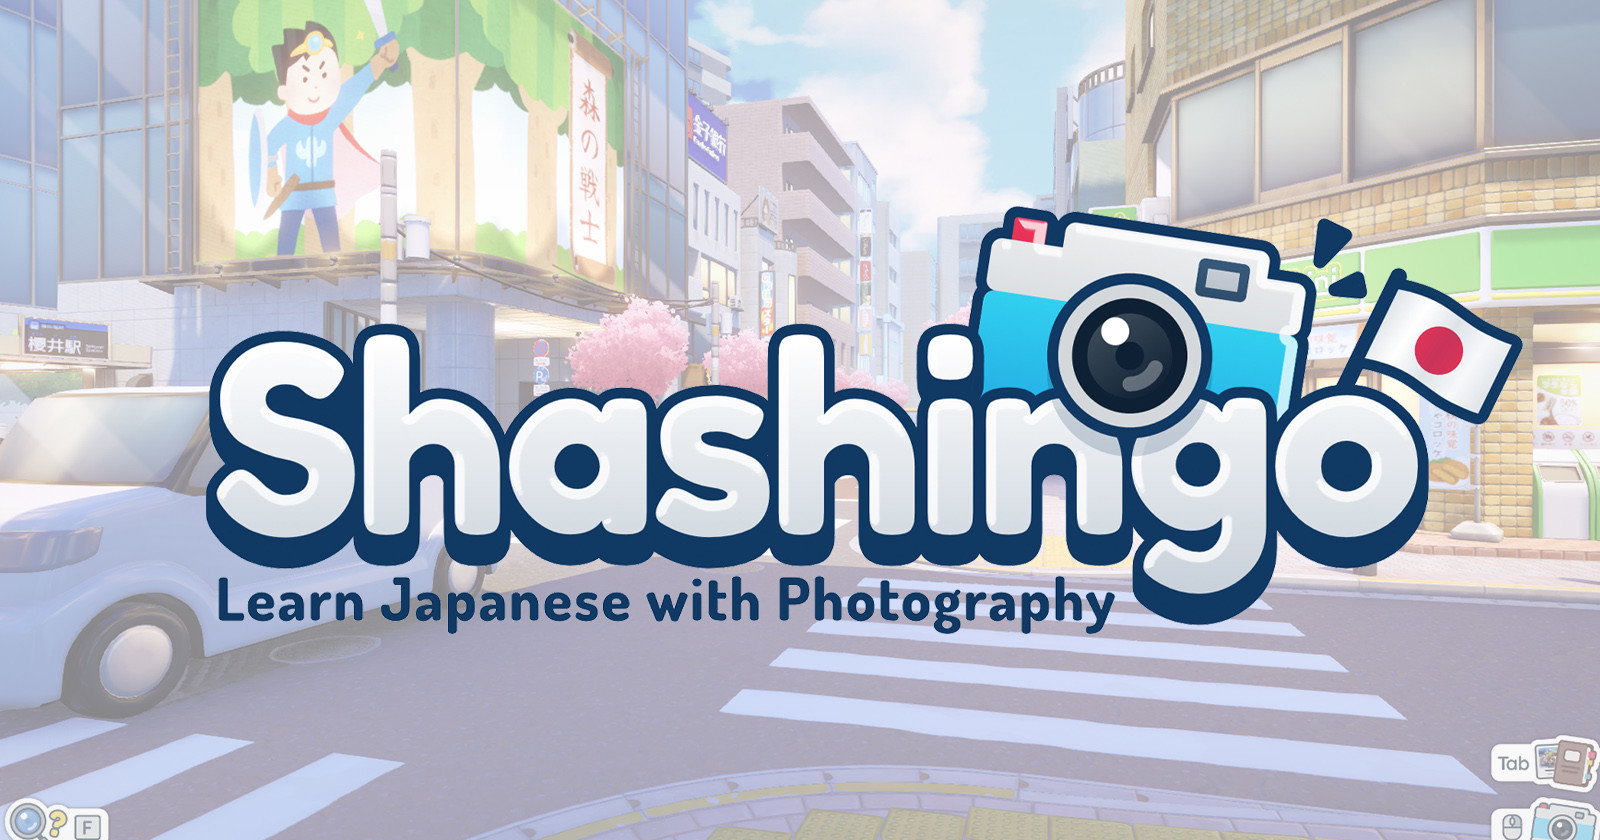 Shashingo is a Photography Video Game That Teaches You Japanese